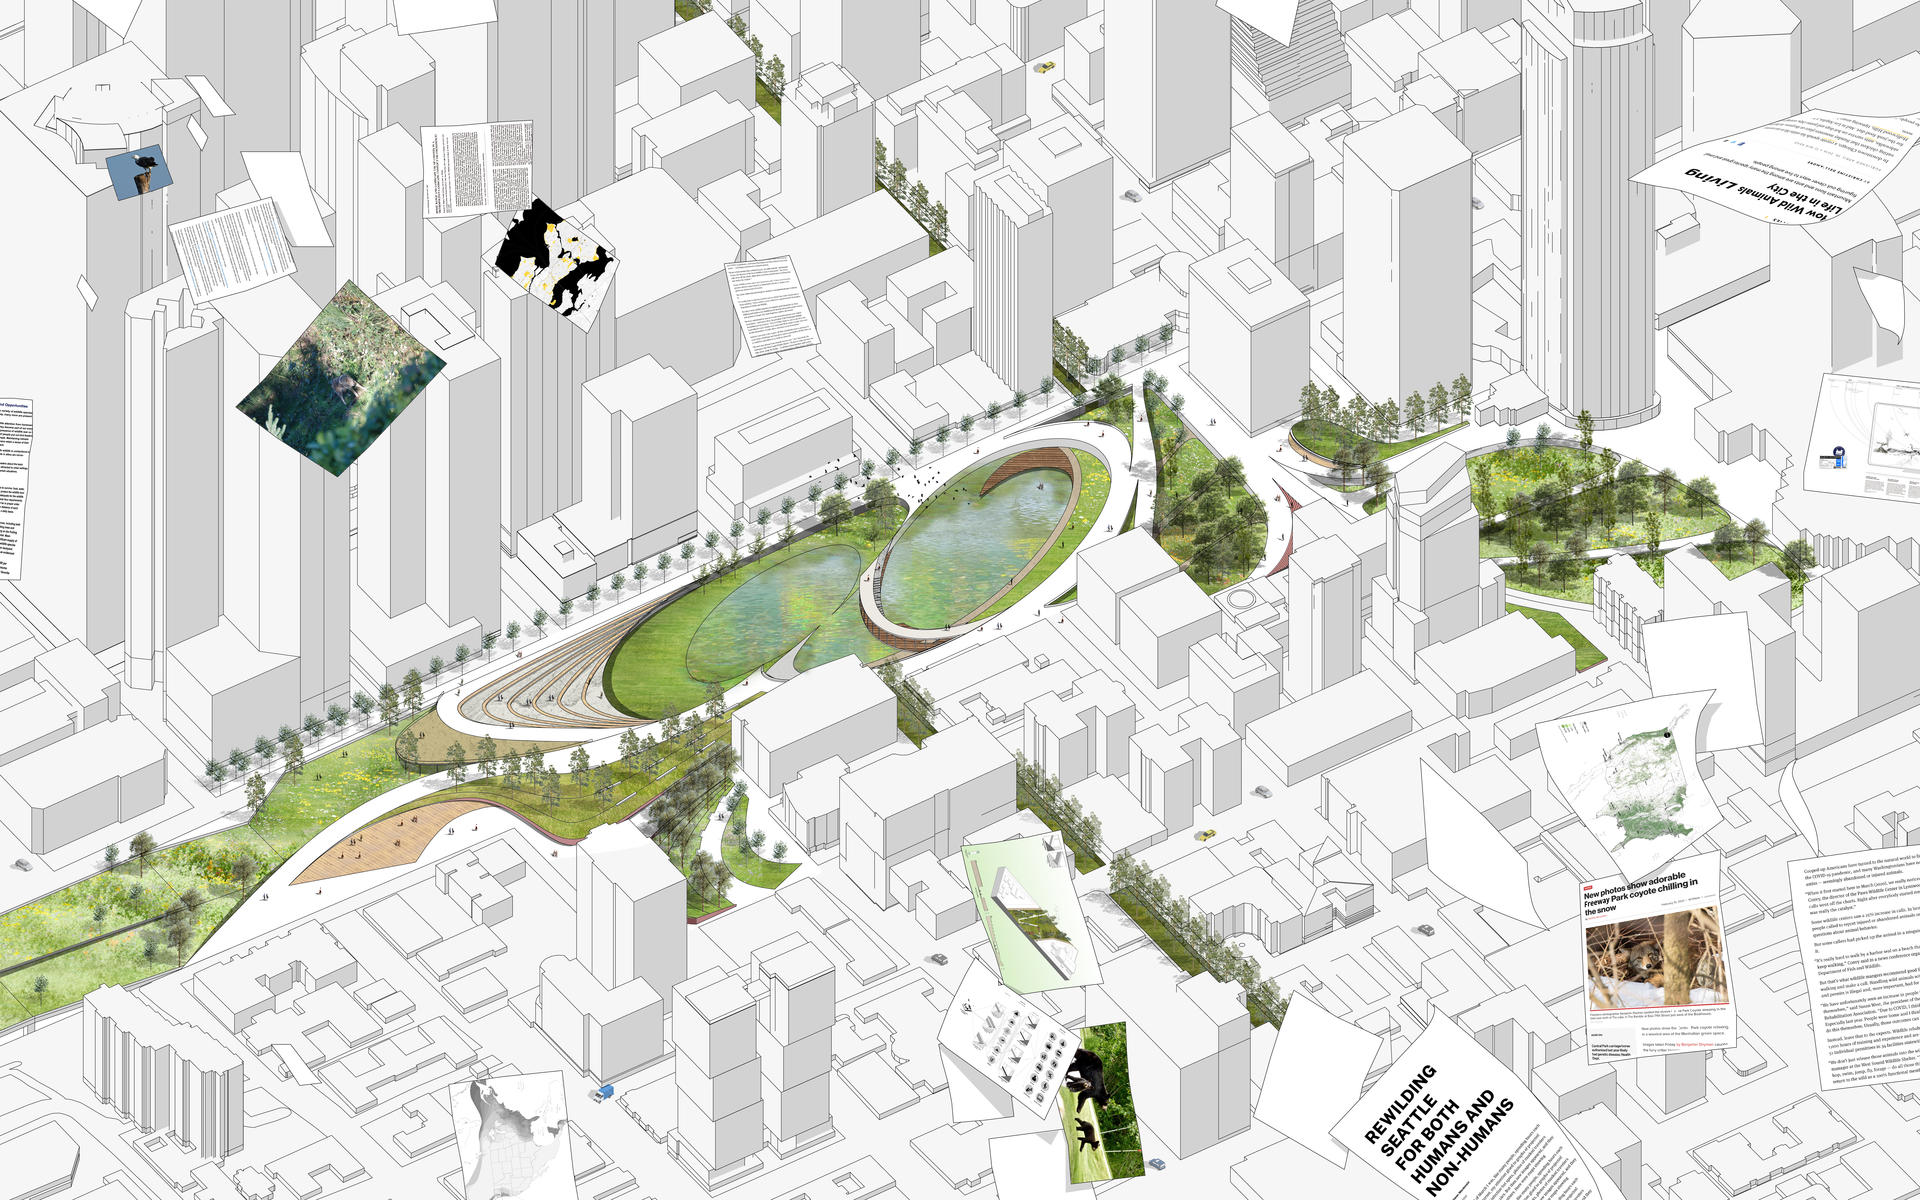 Through the whole green network, it connects and renovates relevant green spaces. The new freeway park shows how it functions as a central station for non-humans to connect different corridors. 